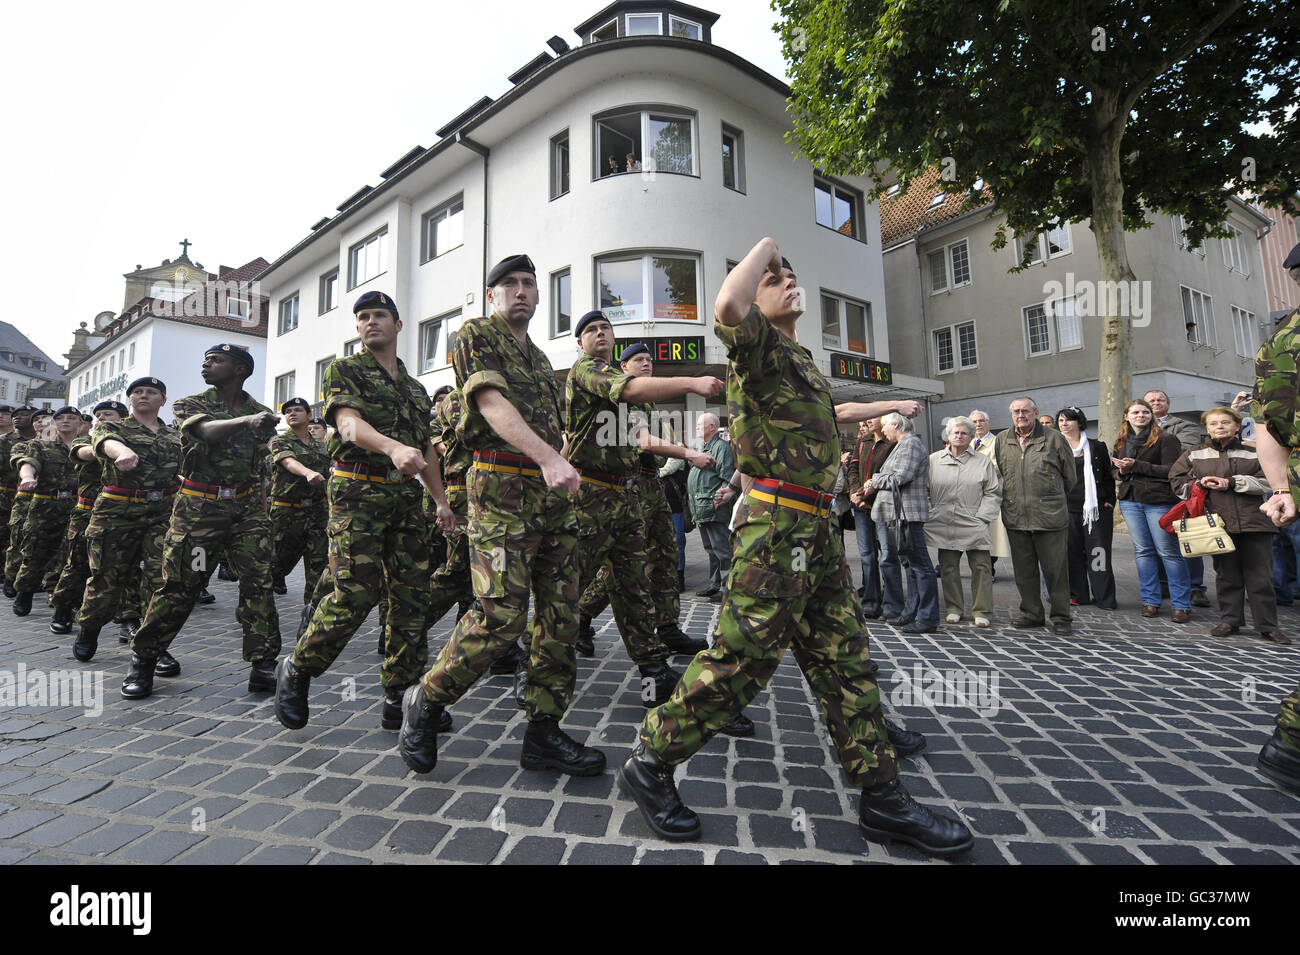 A soldier salute as over 500 soldiers from 20th Armoured Brigade - the Iron Fist, mark their return from operations in Iraq, Afghanistan and Kosovo by parading through their Garrison town of Paderborn in front of hundreds of spectators from both the local German community and soldier's families and friends. Stock Photo